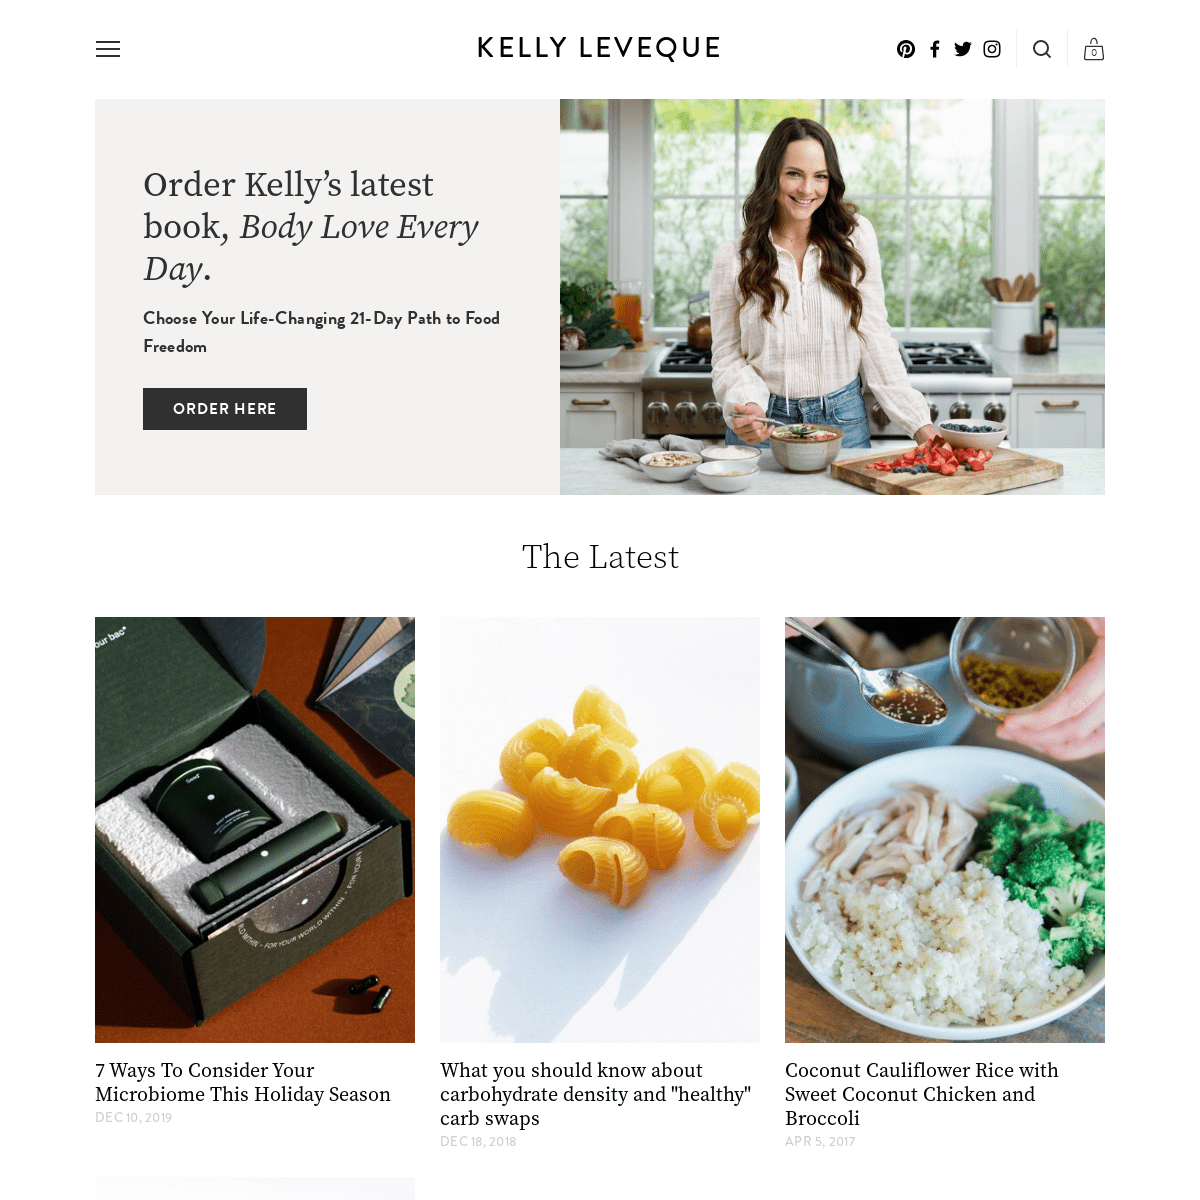 A complete backup of bewellbykelly.com